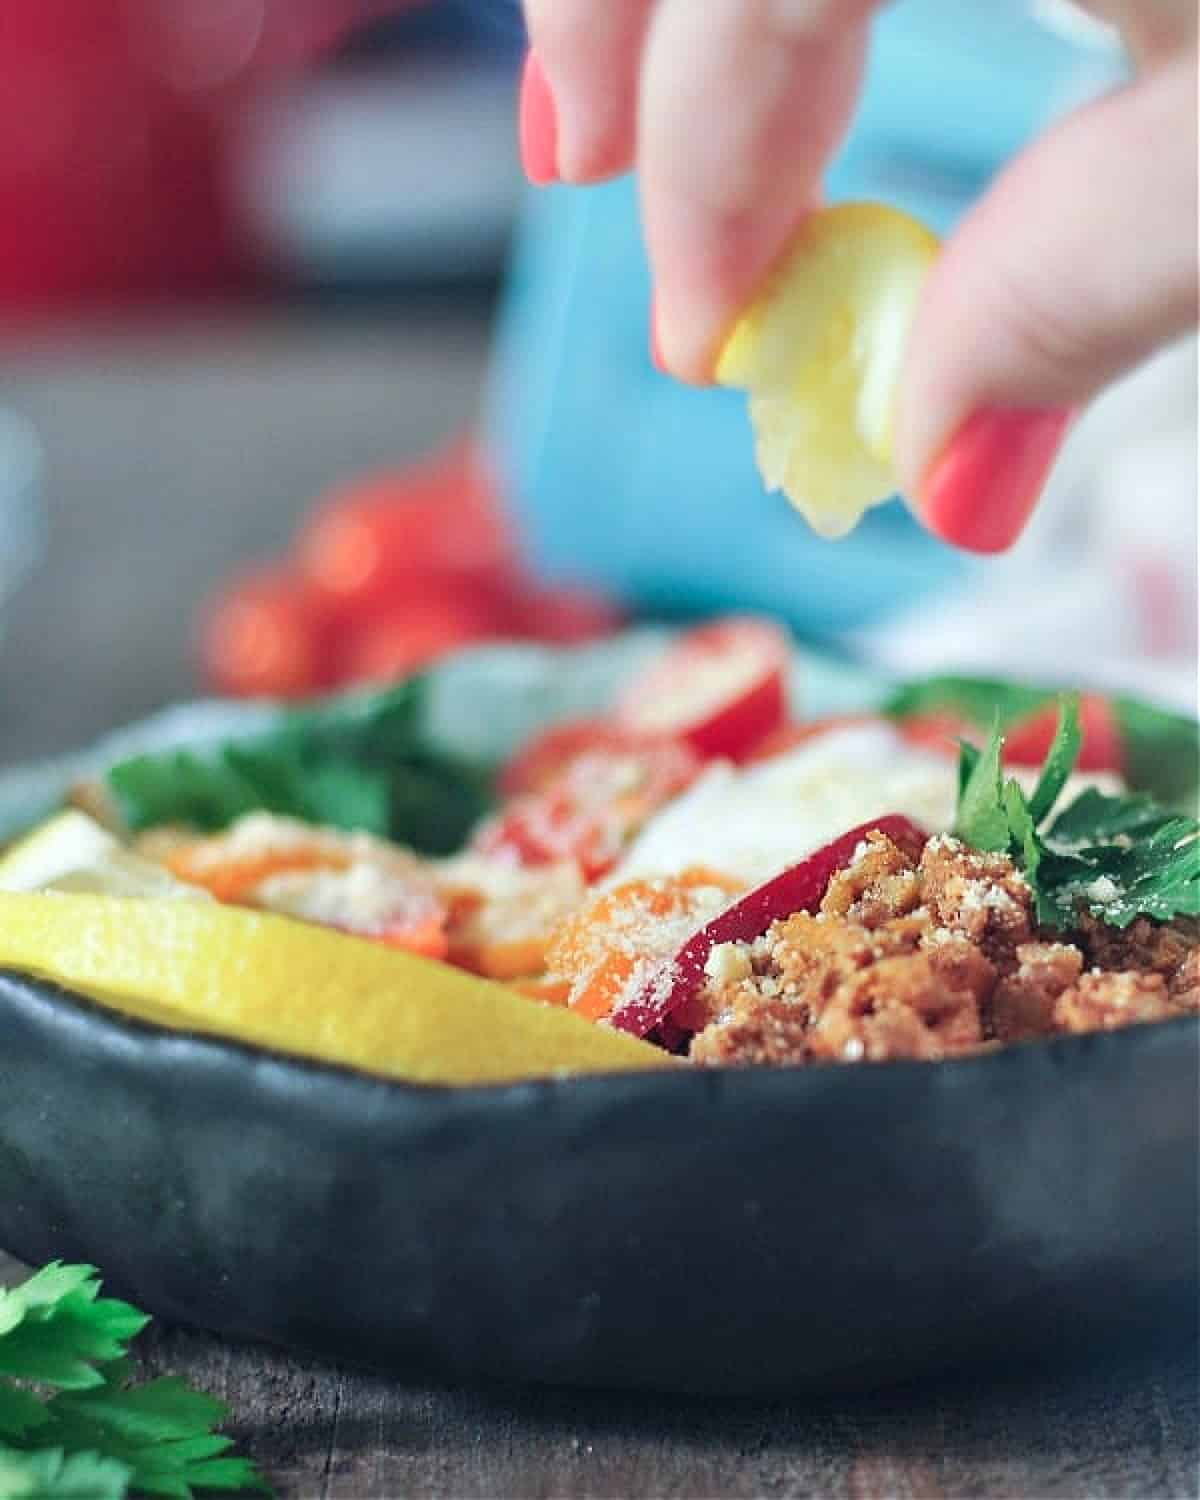 Close up of a hand squeezing lemon over a deconstructed stuffed pepper bowl (spinach and greens, vegan ground beef, cherry tomatoes, bell pepper slices, green onion and cilantro).